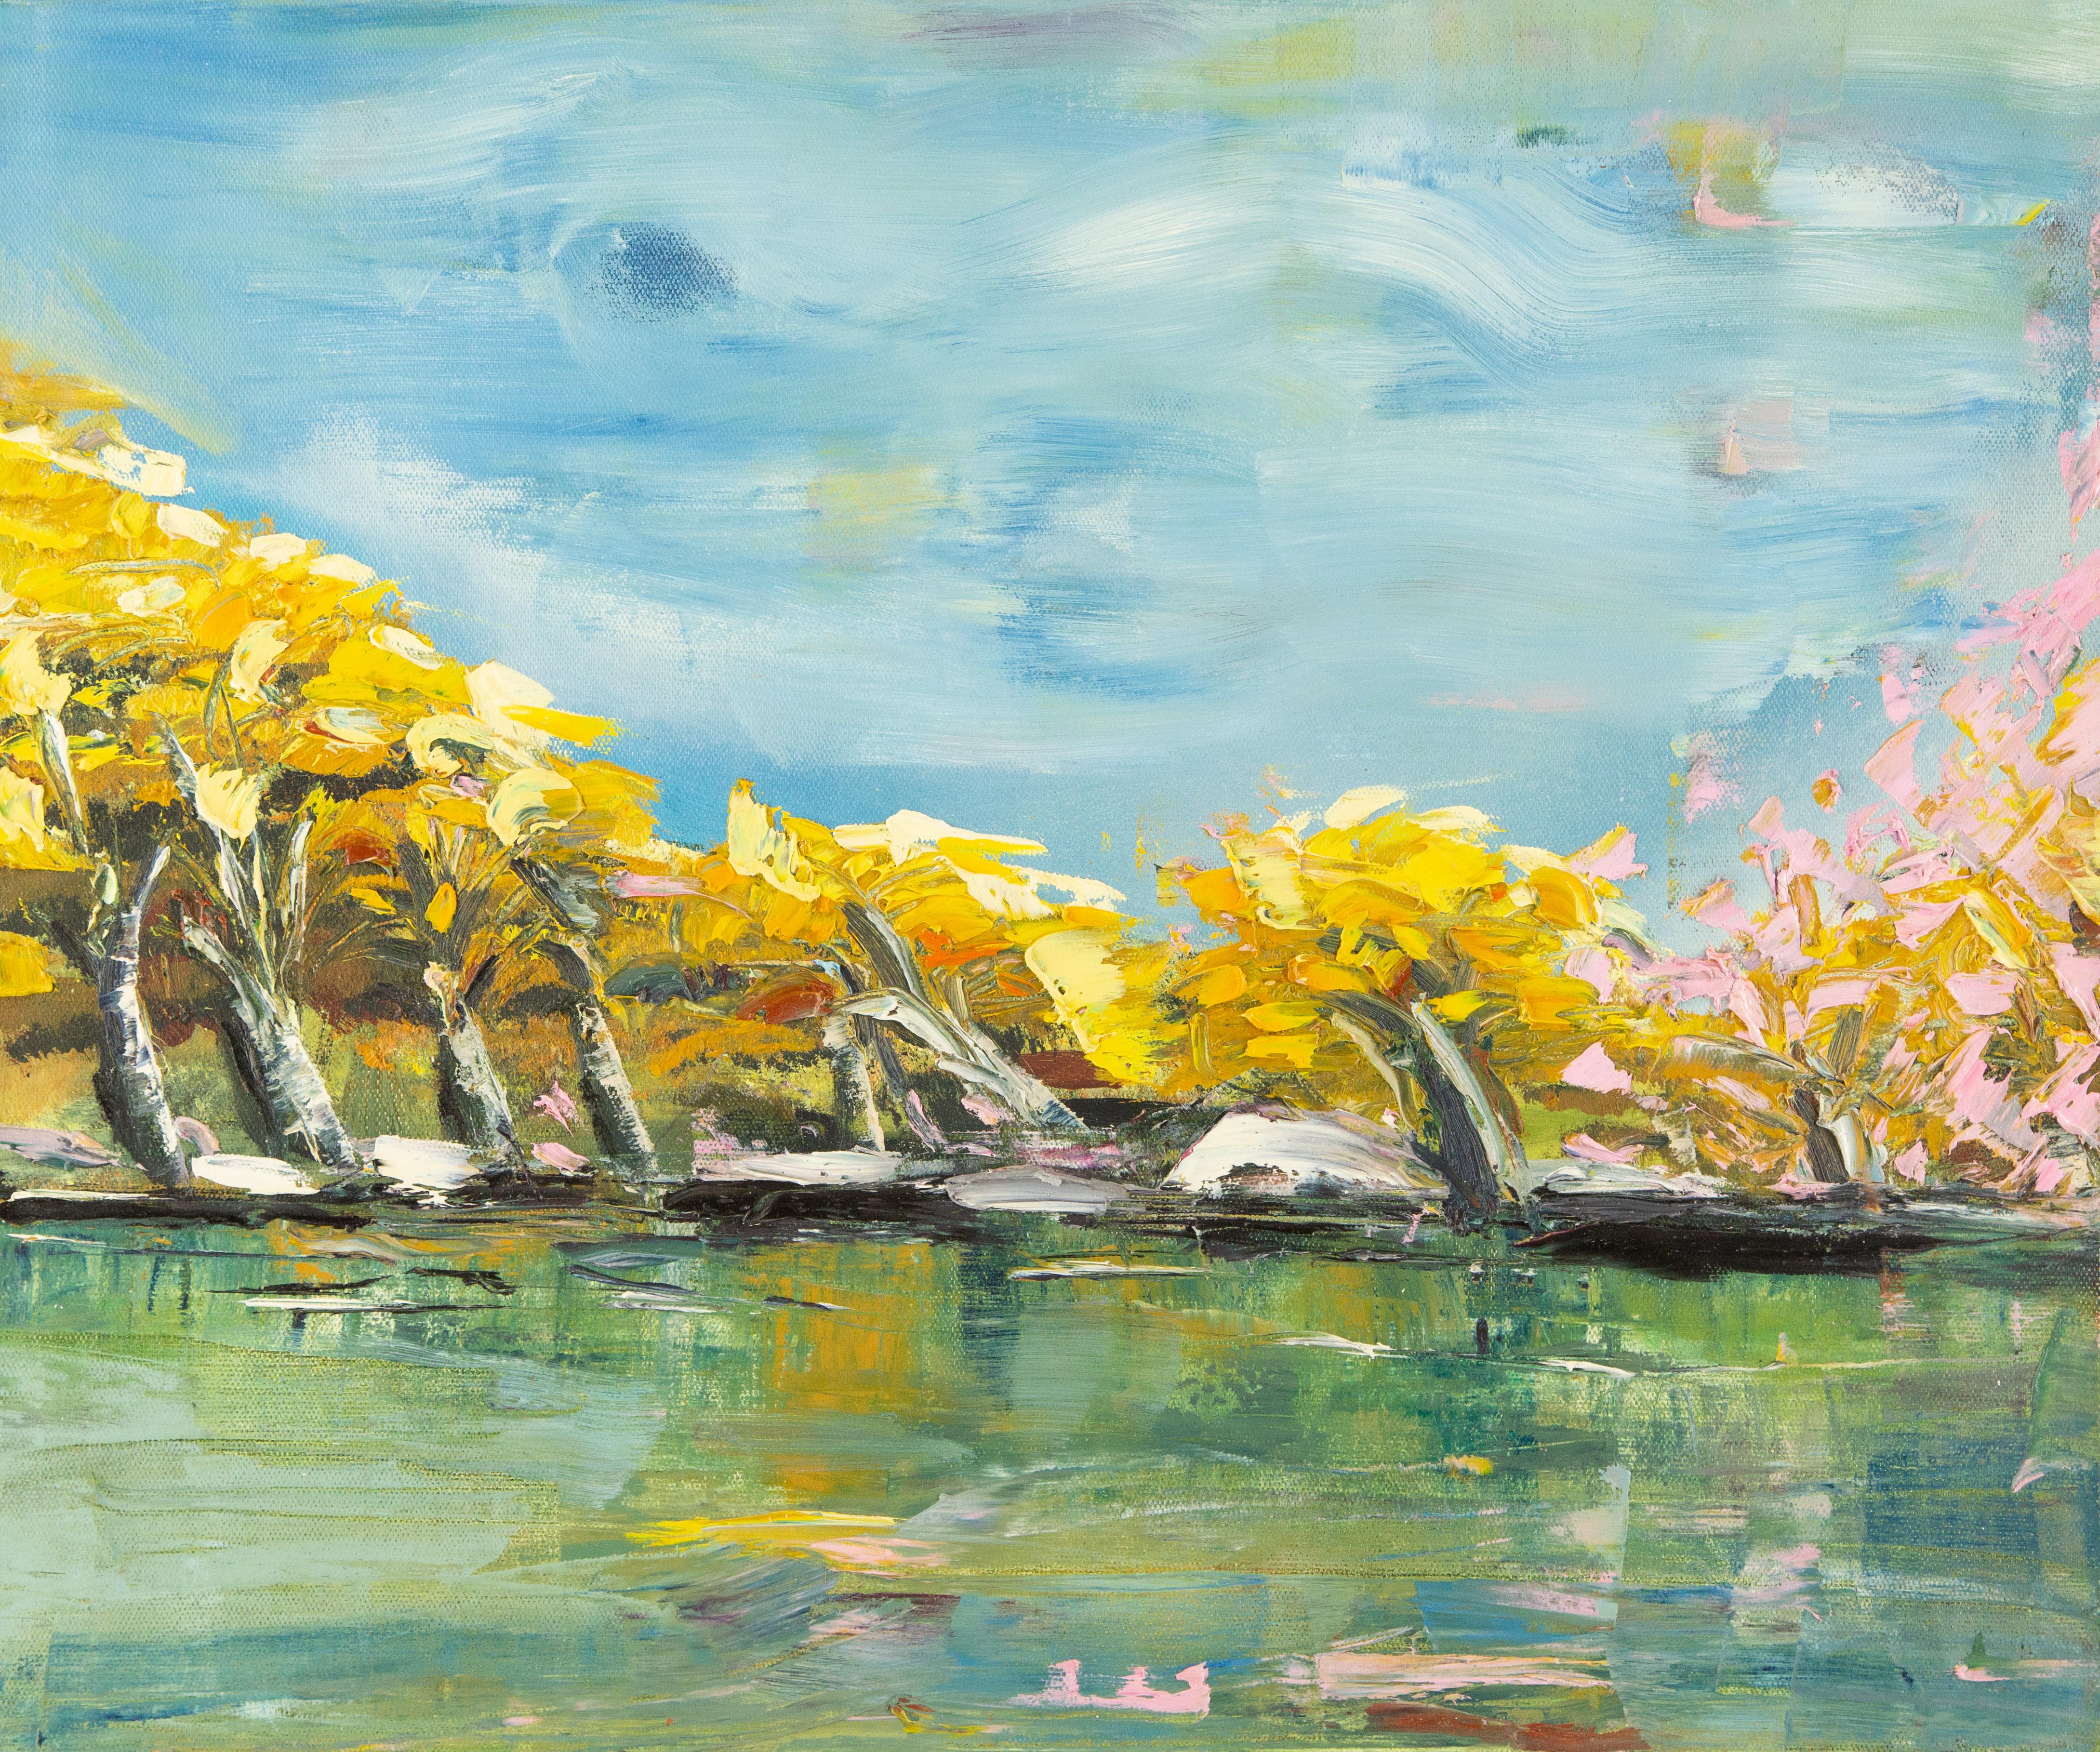 Yan Liu Landscape Original Oil Painting "Spring Day Within"